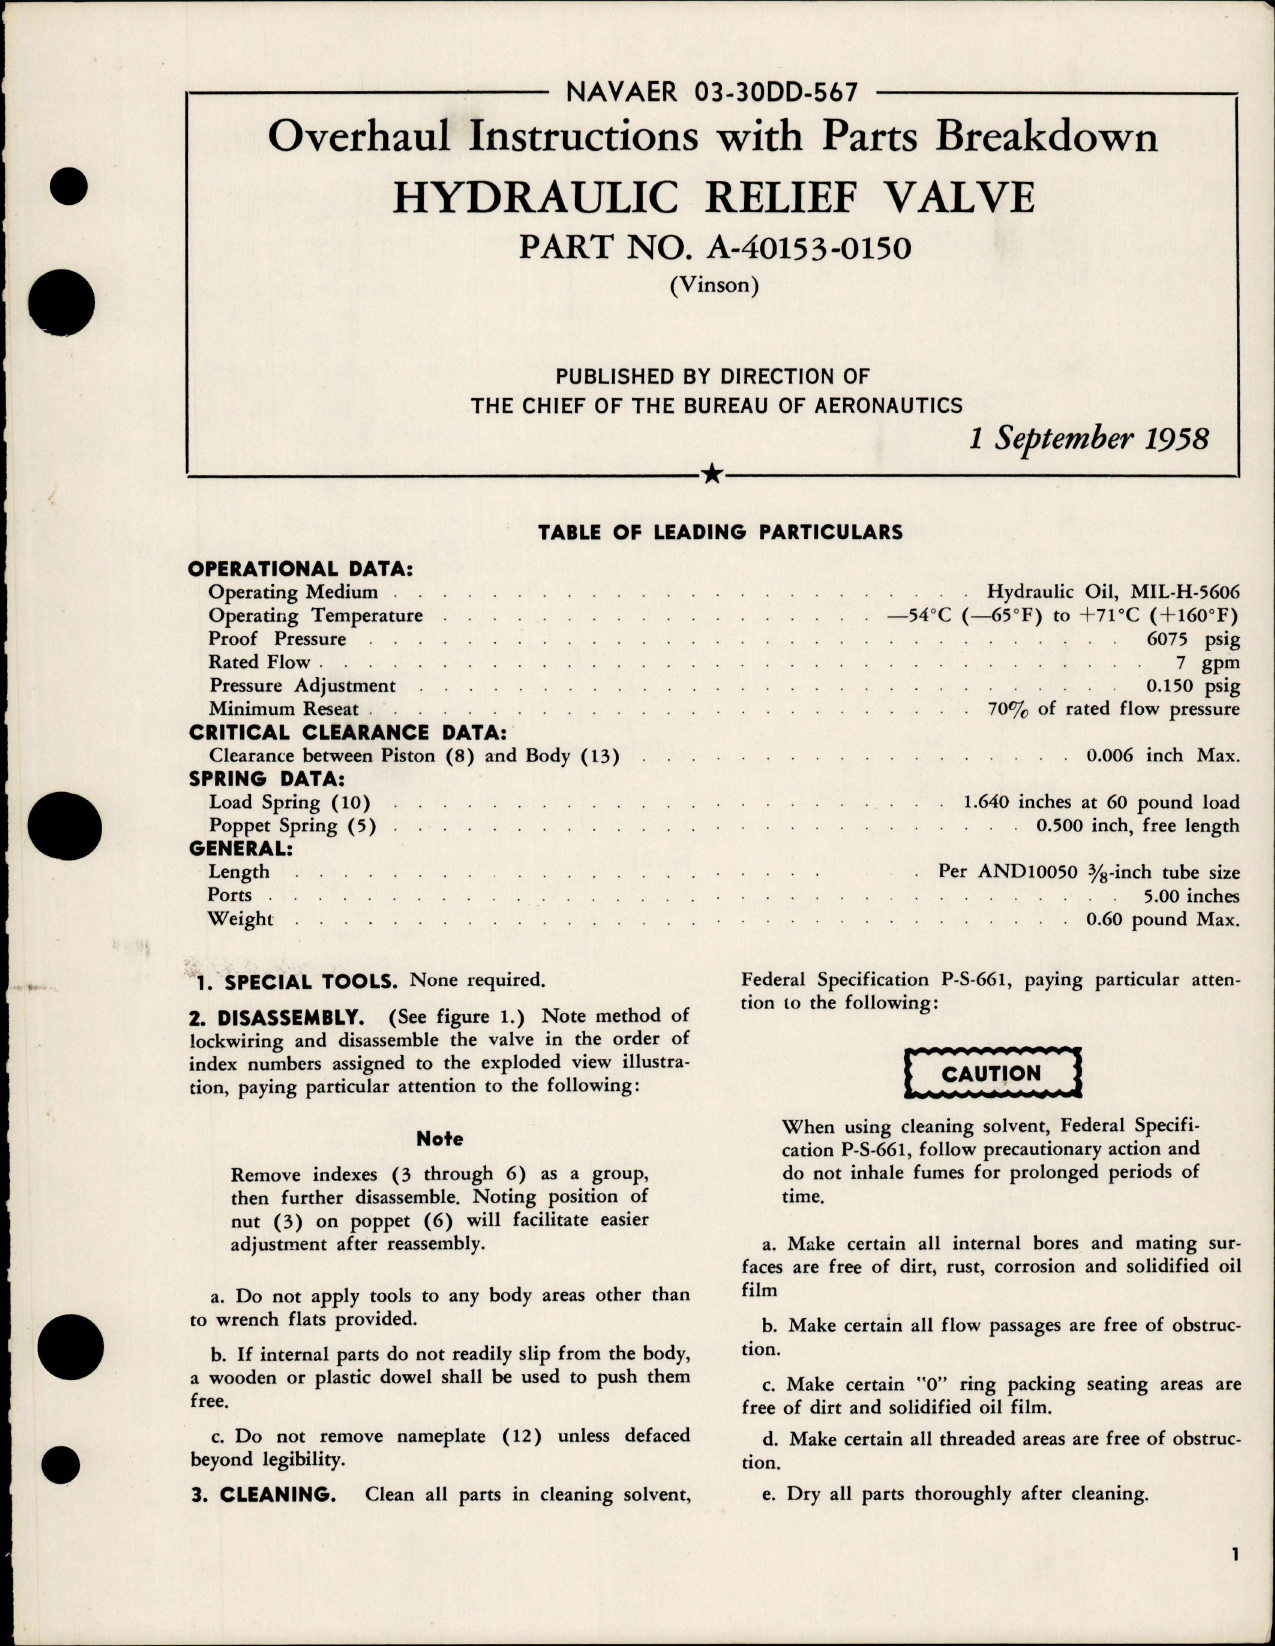 Sample page 1 from AirCorps Library document: Overhaul Instructions with Parts Breakdown for Hydraulic Relief Valve - Part A-40153-0150 